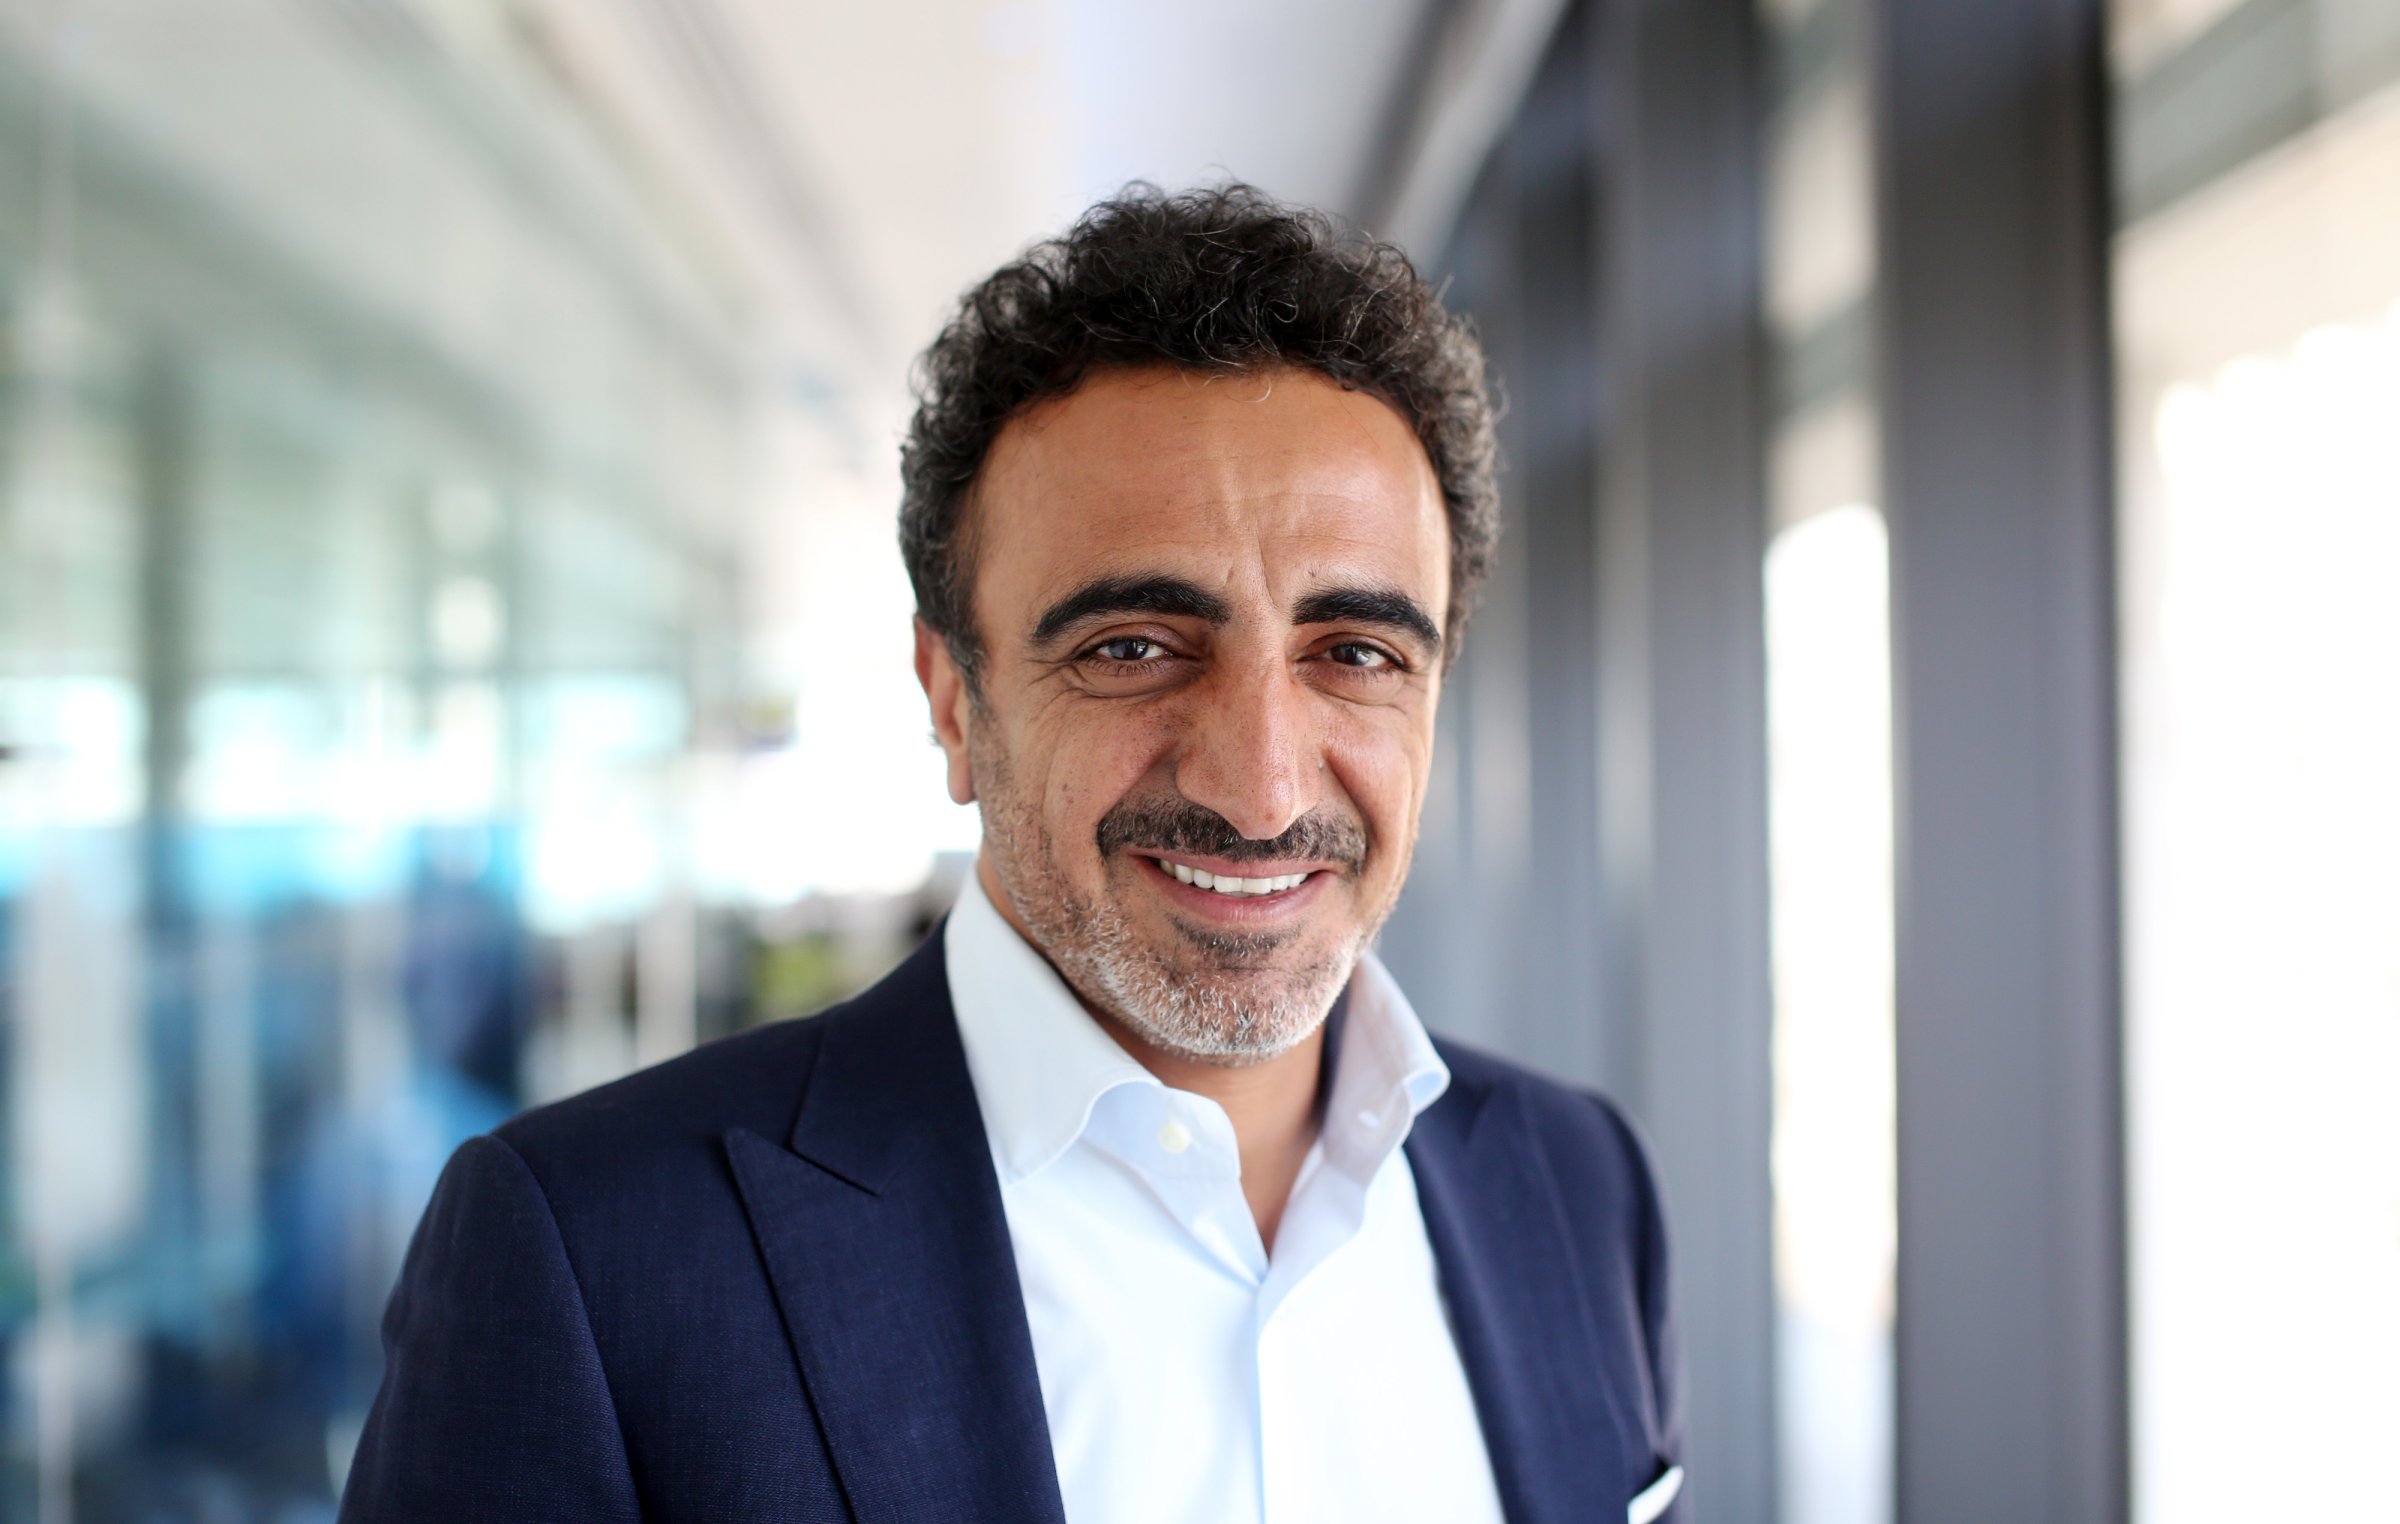 Hamdi Ulukaya, a billionaire and founder, president and chief executive officer of Chobani Inc. in London on July 17, 2013.